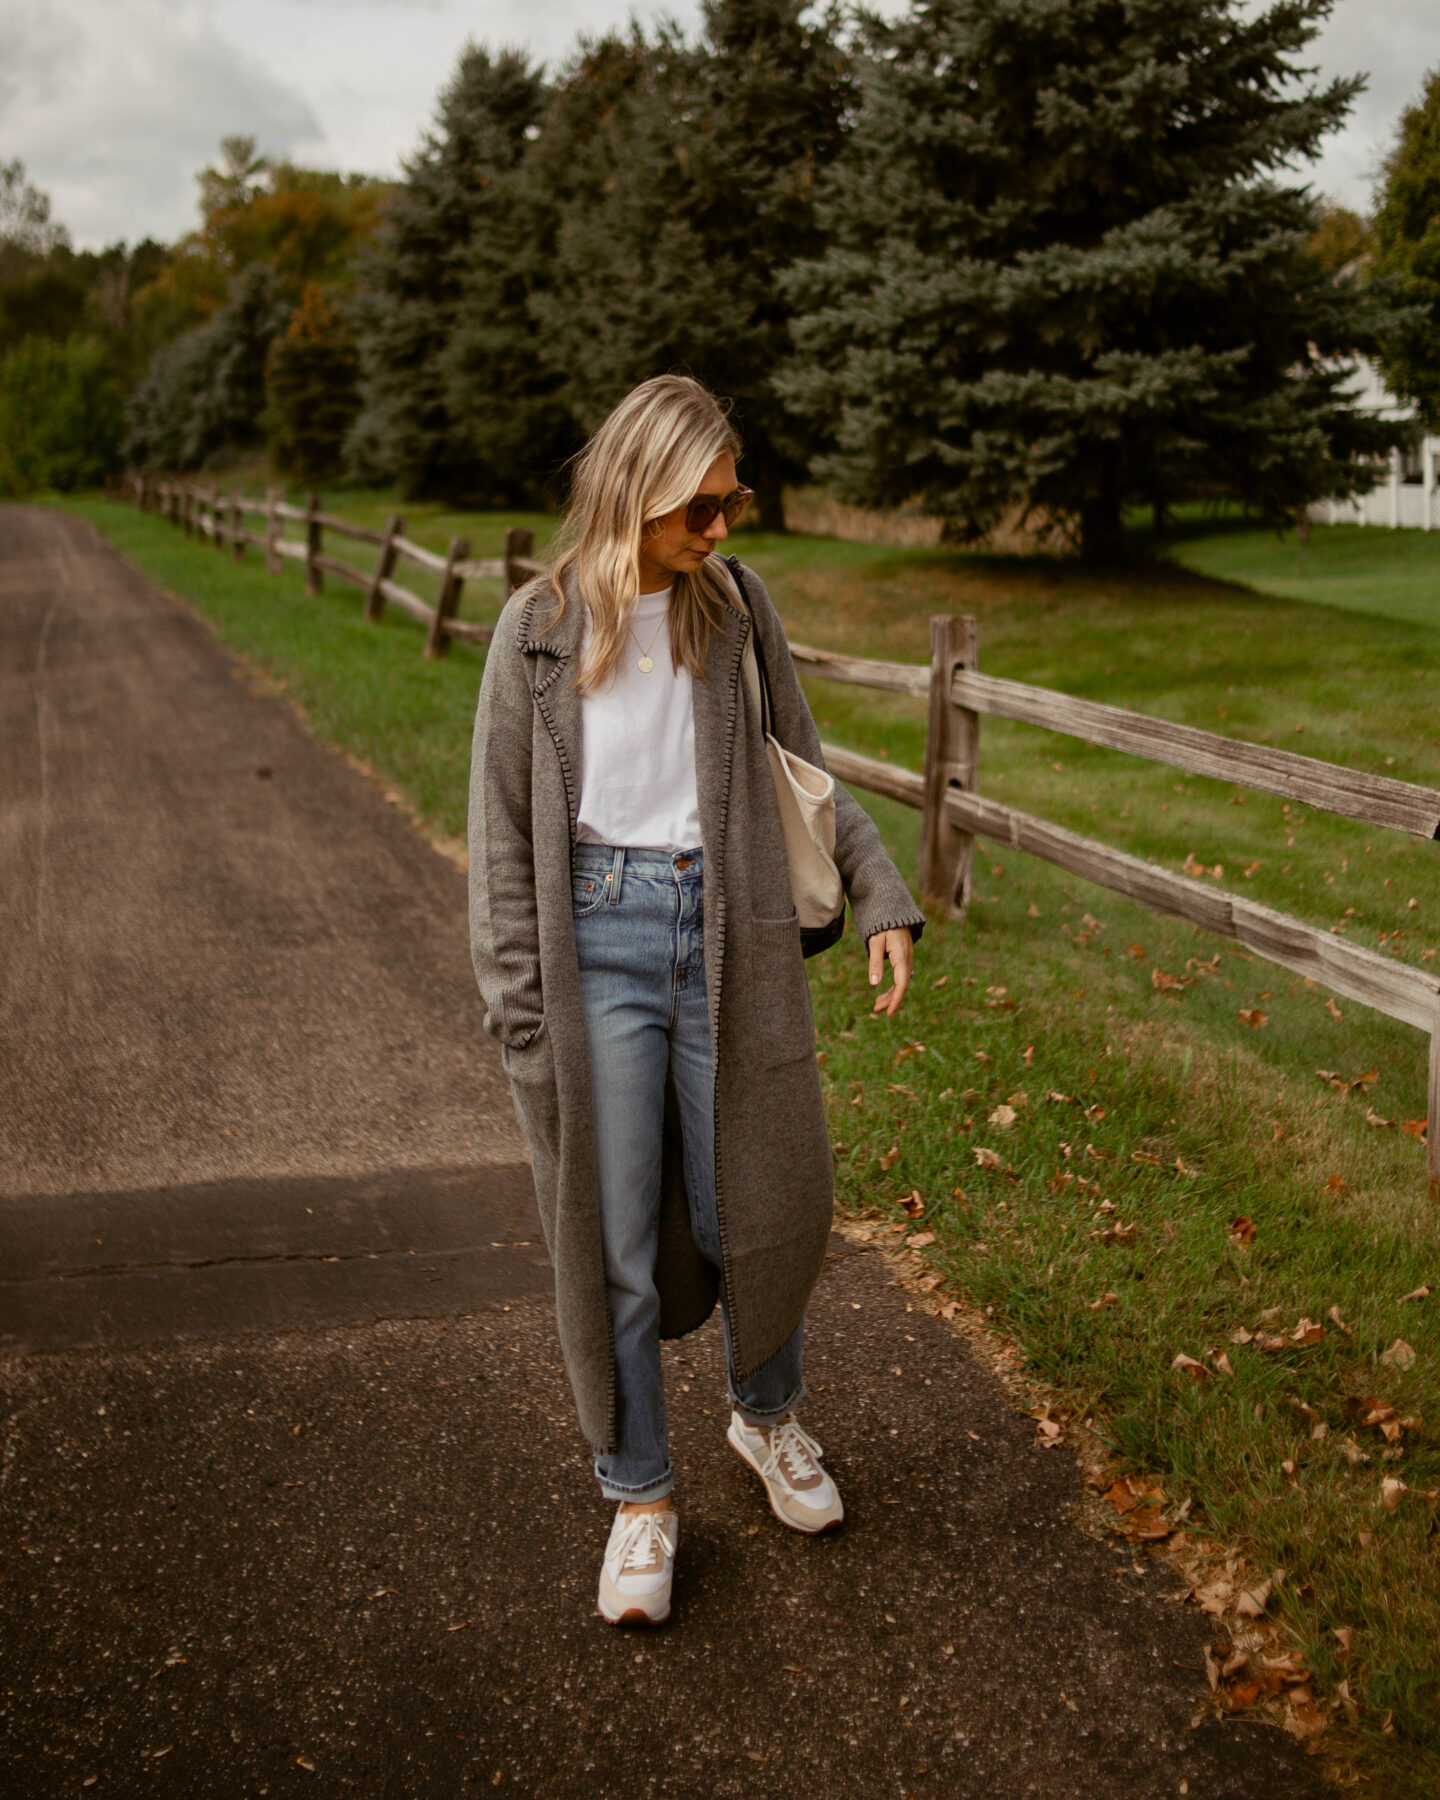 Karin Emily wears a relaxed pair of jeans and an oversized white tee under a gray maxi cardigan